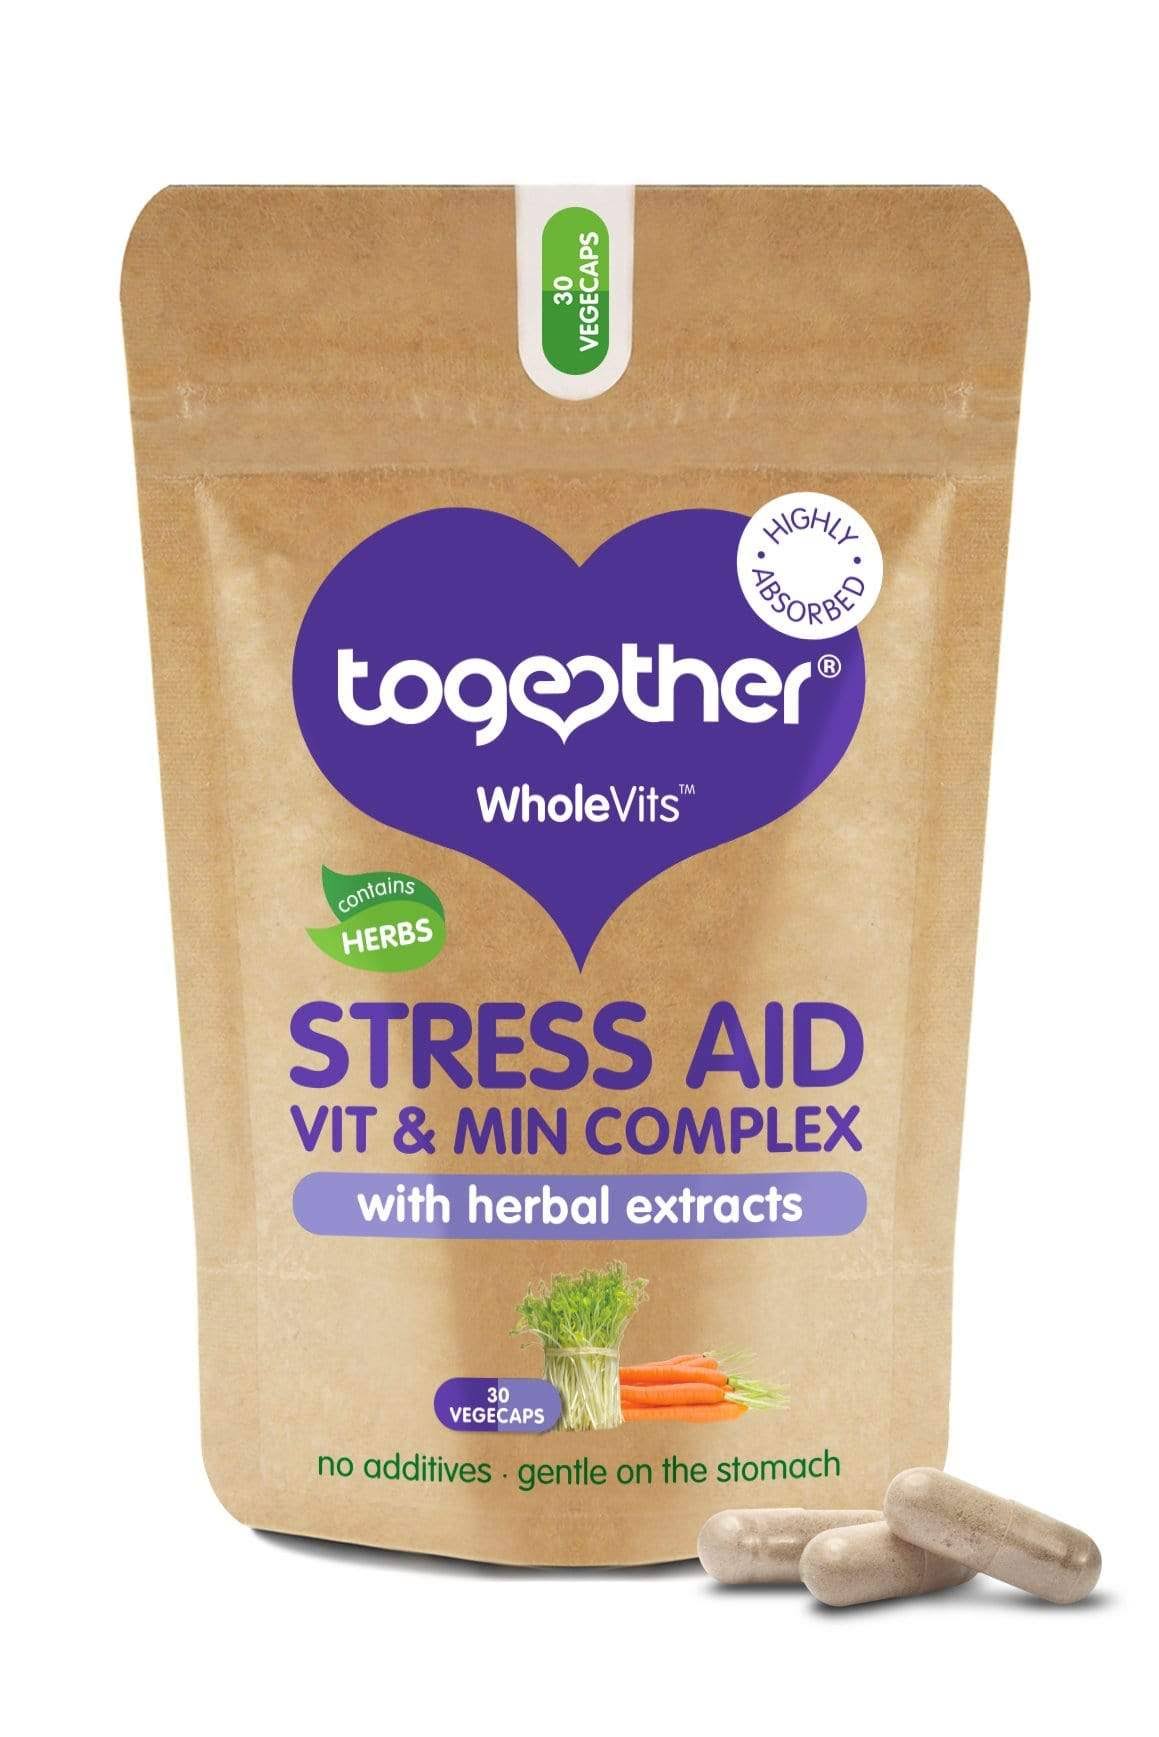 Together Health WholeVit Stress Aid Complex - 30ct